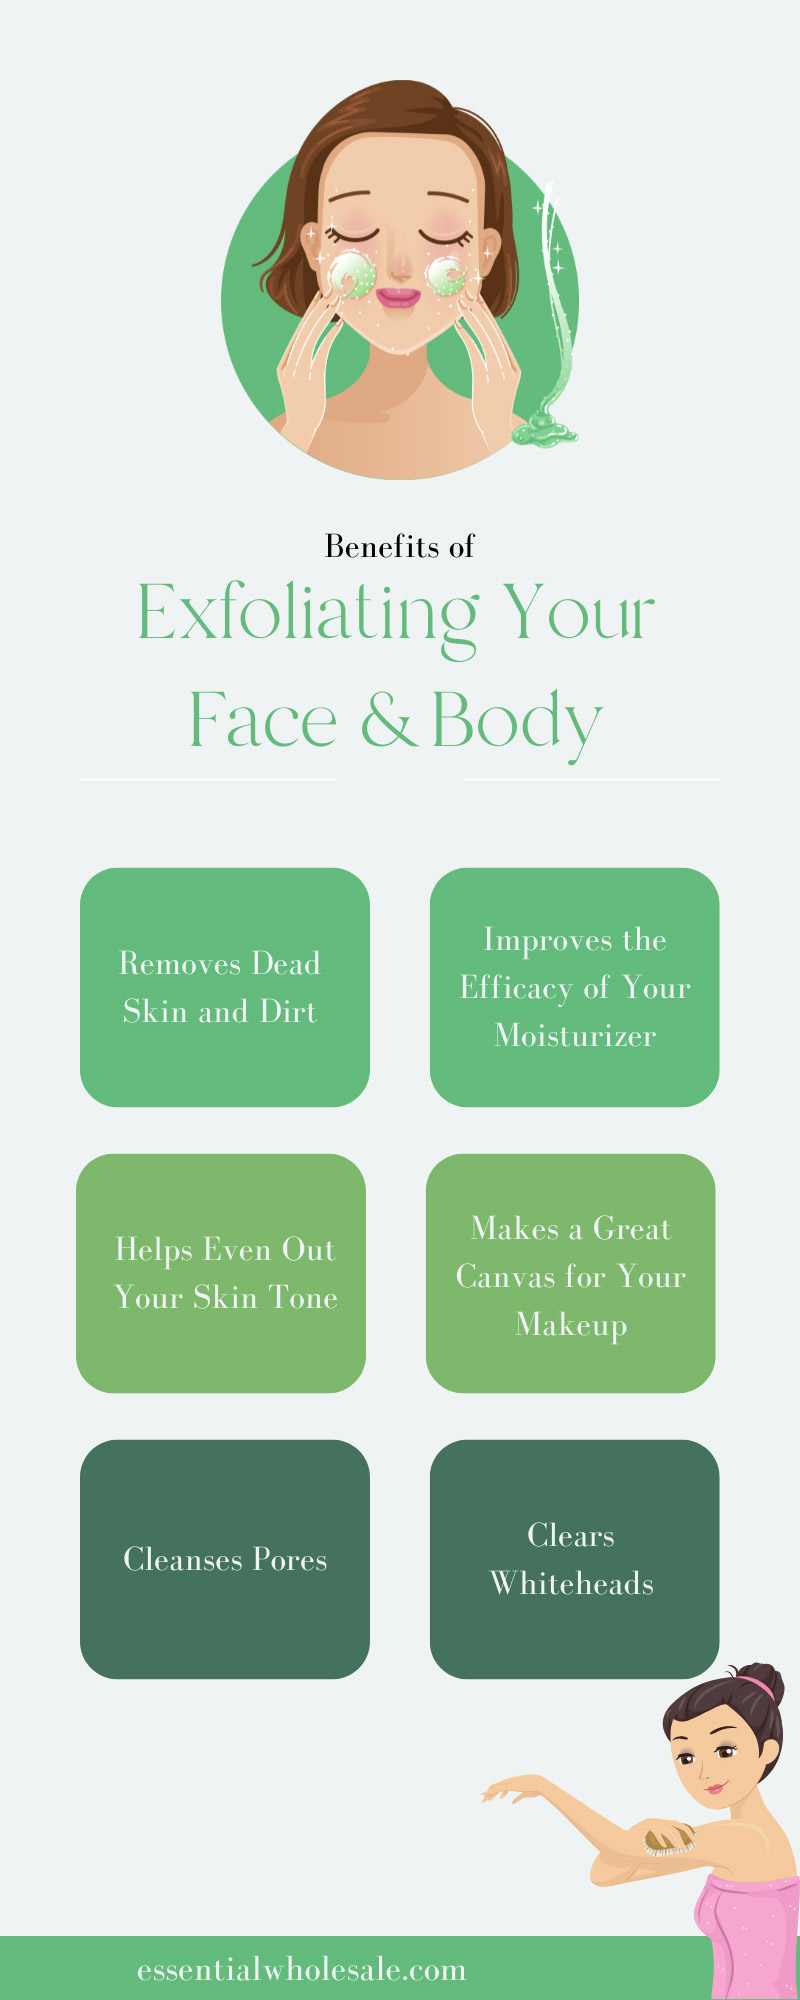 Top 10 Benefits of Exfoliating Your Face & Body